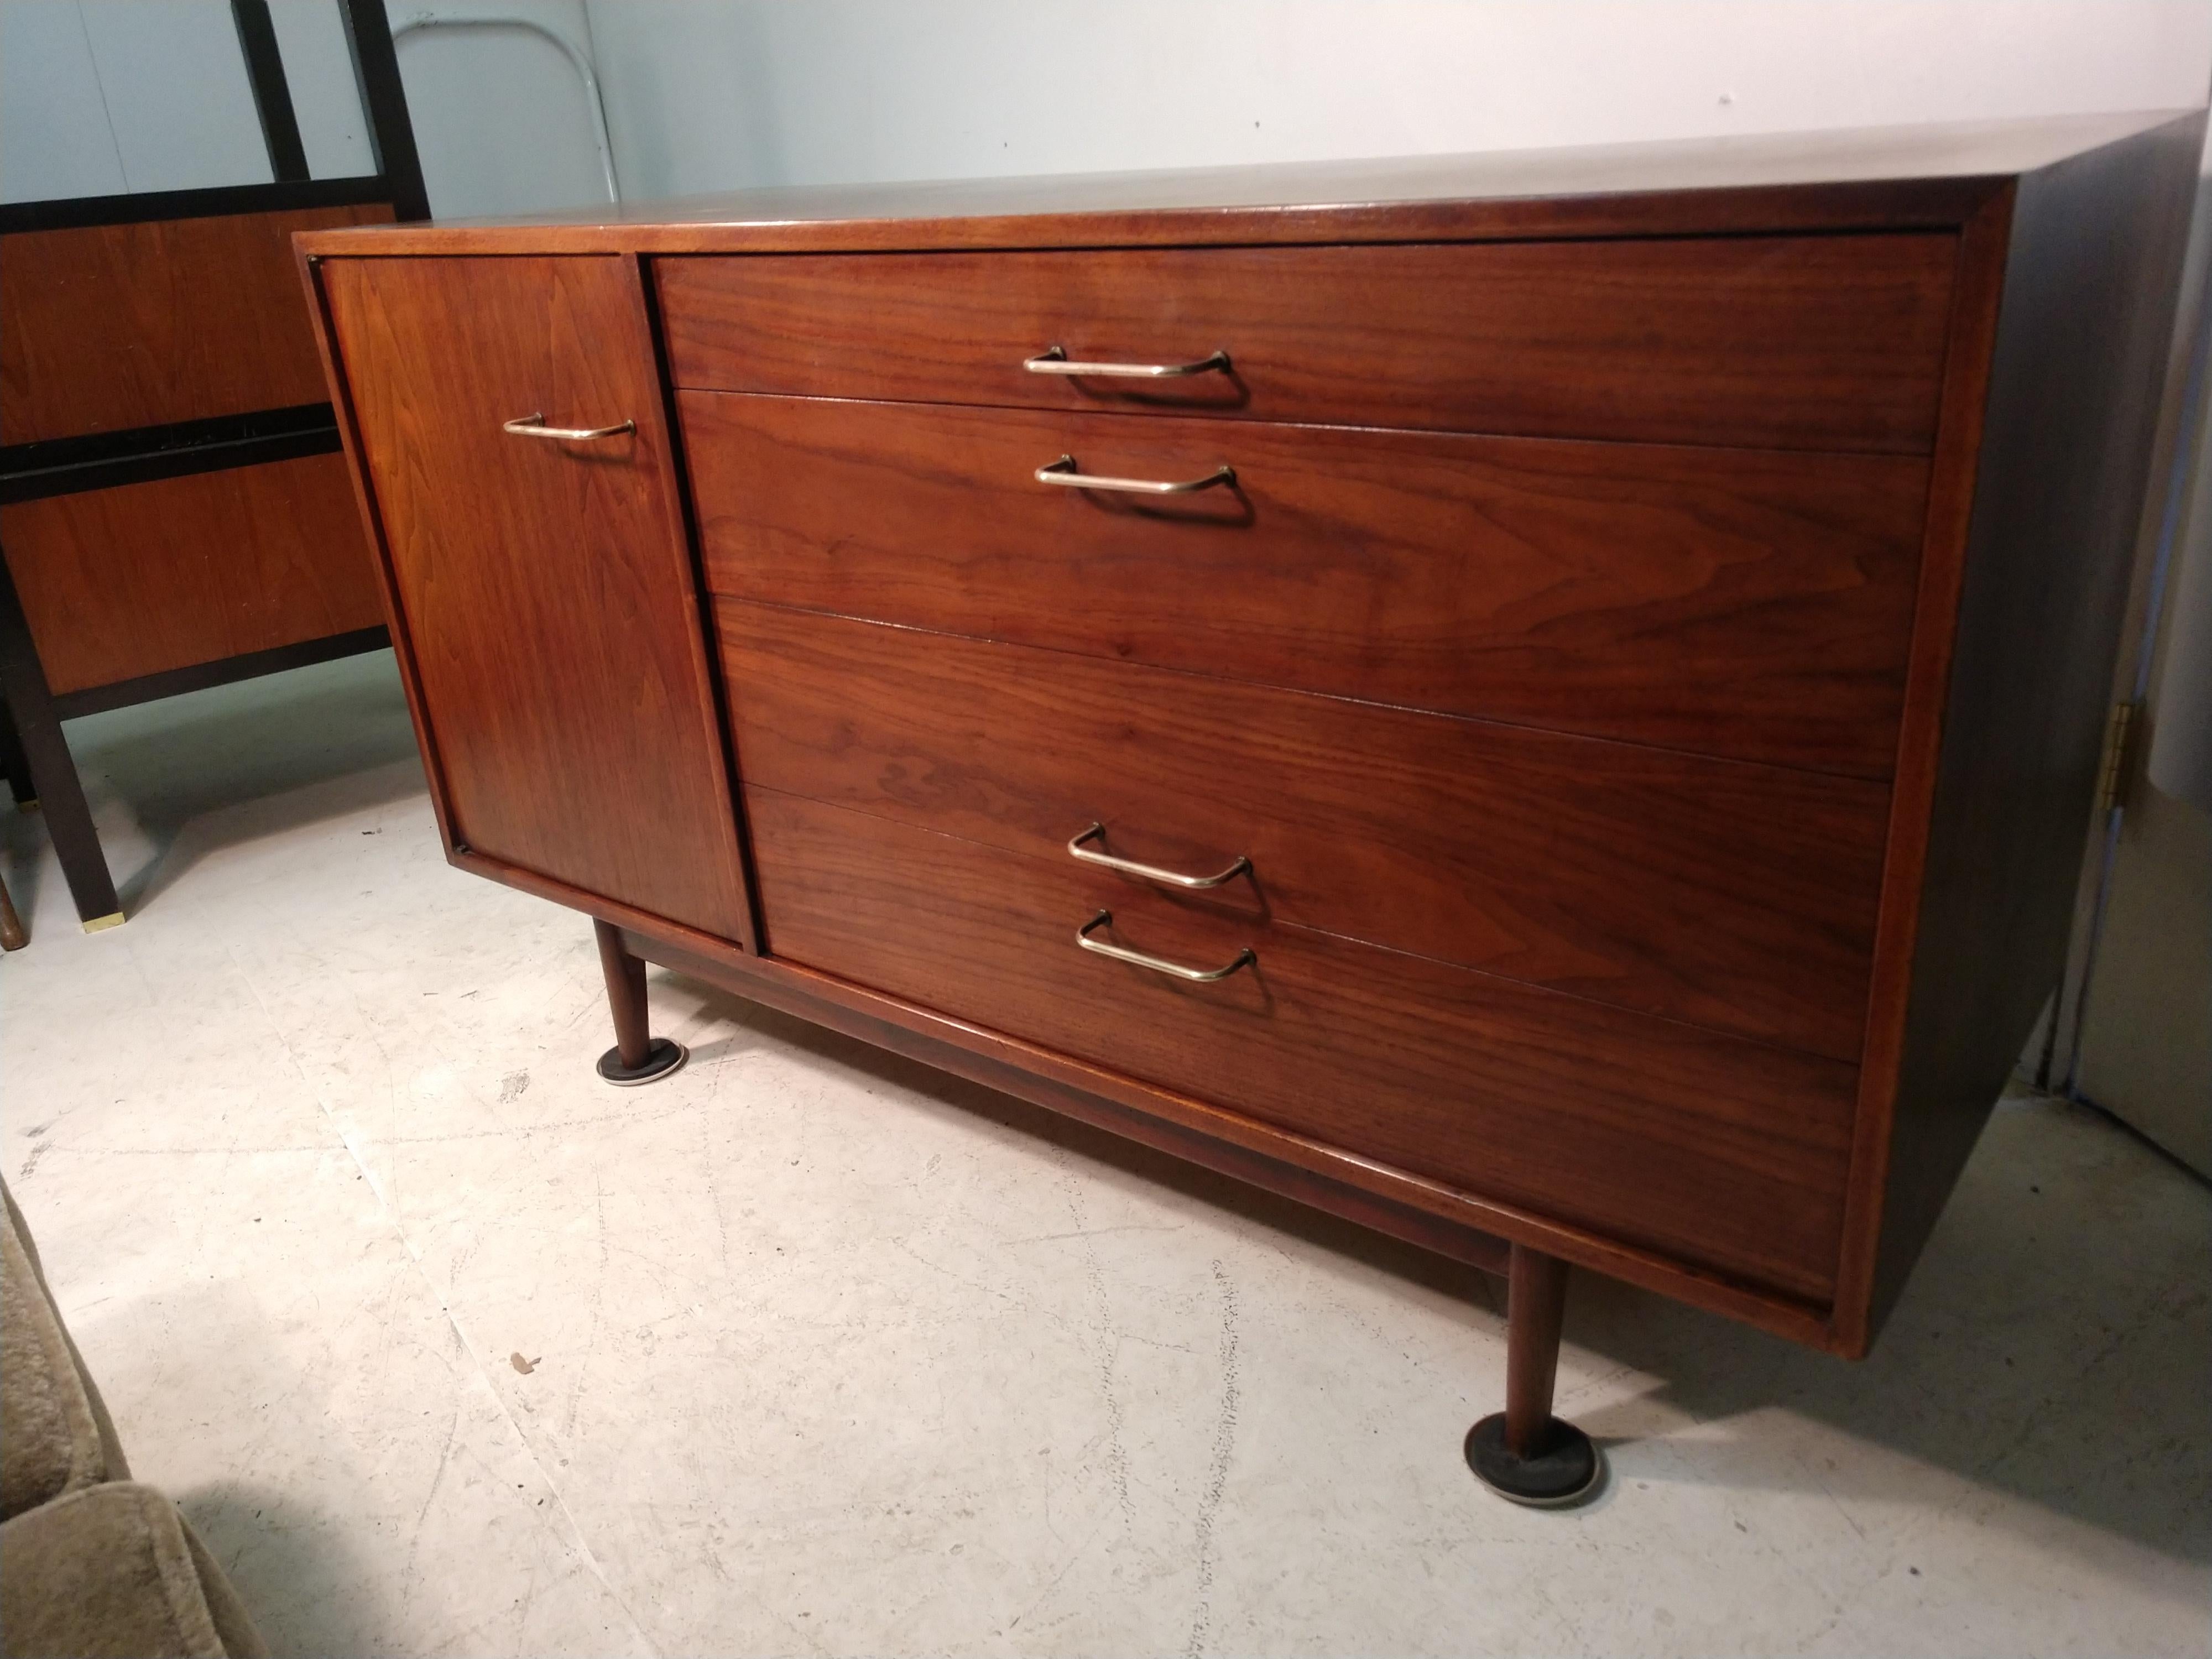 Fabulous walnut server or dresser. 5 drawers with a single door closer.
Signed on back Jens Risom design. Has been refinished with teak oil and wax for protection. A few minor ring stains on top. Maple interior gives a striking contrast. Copper